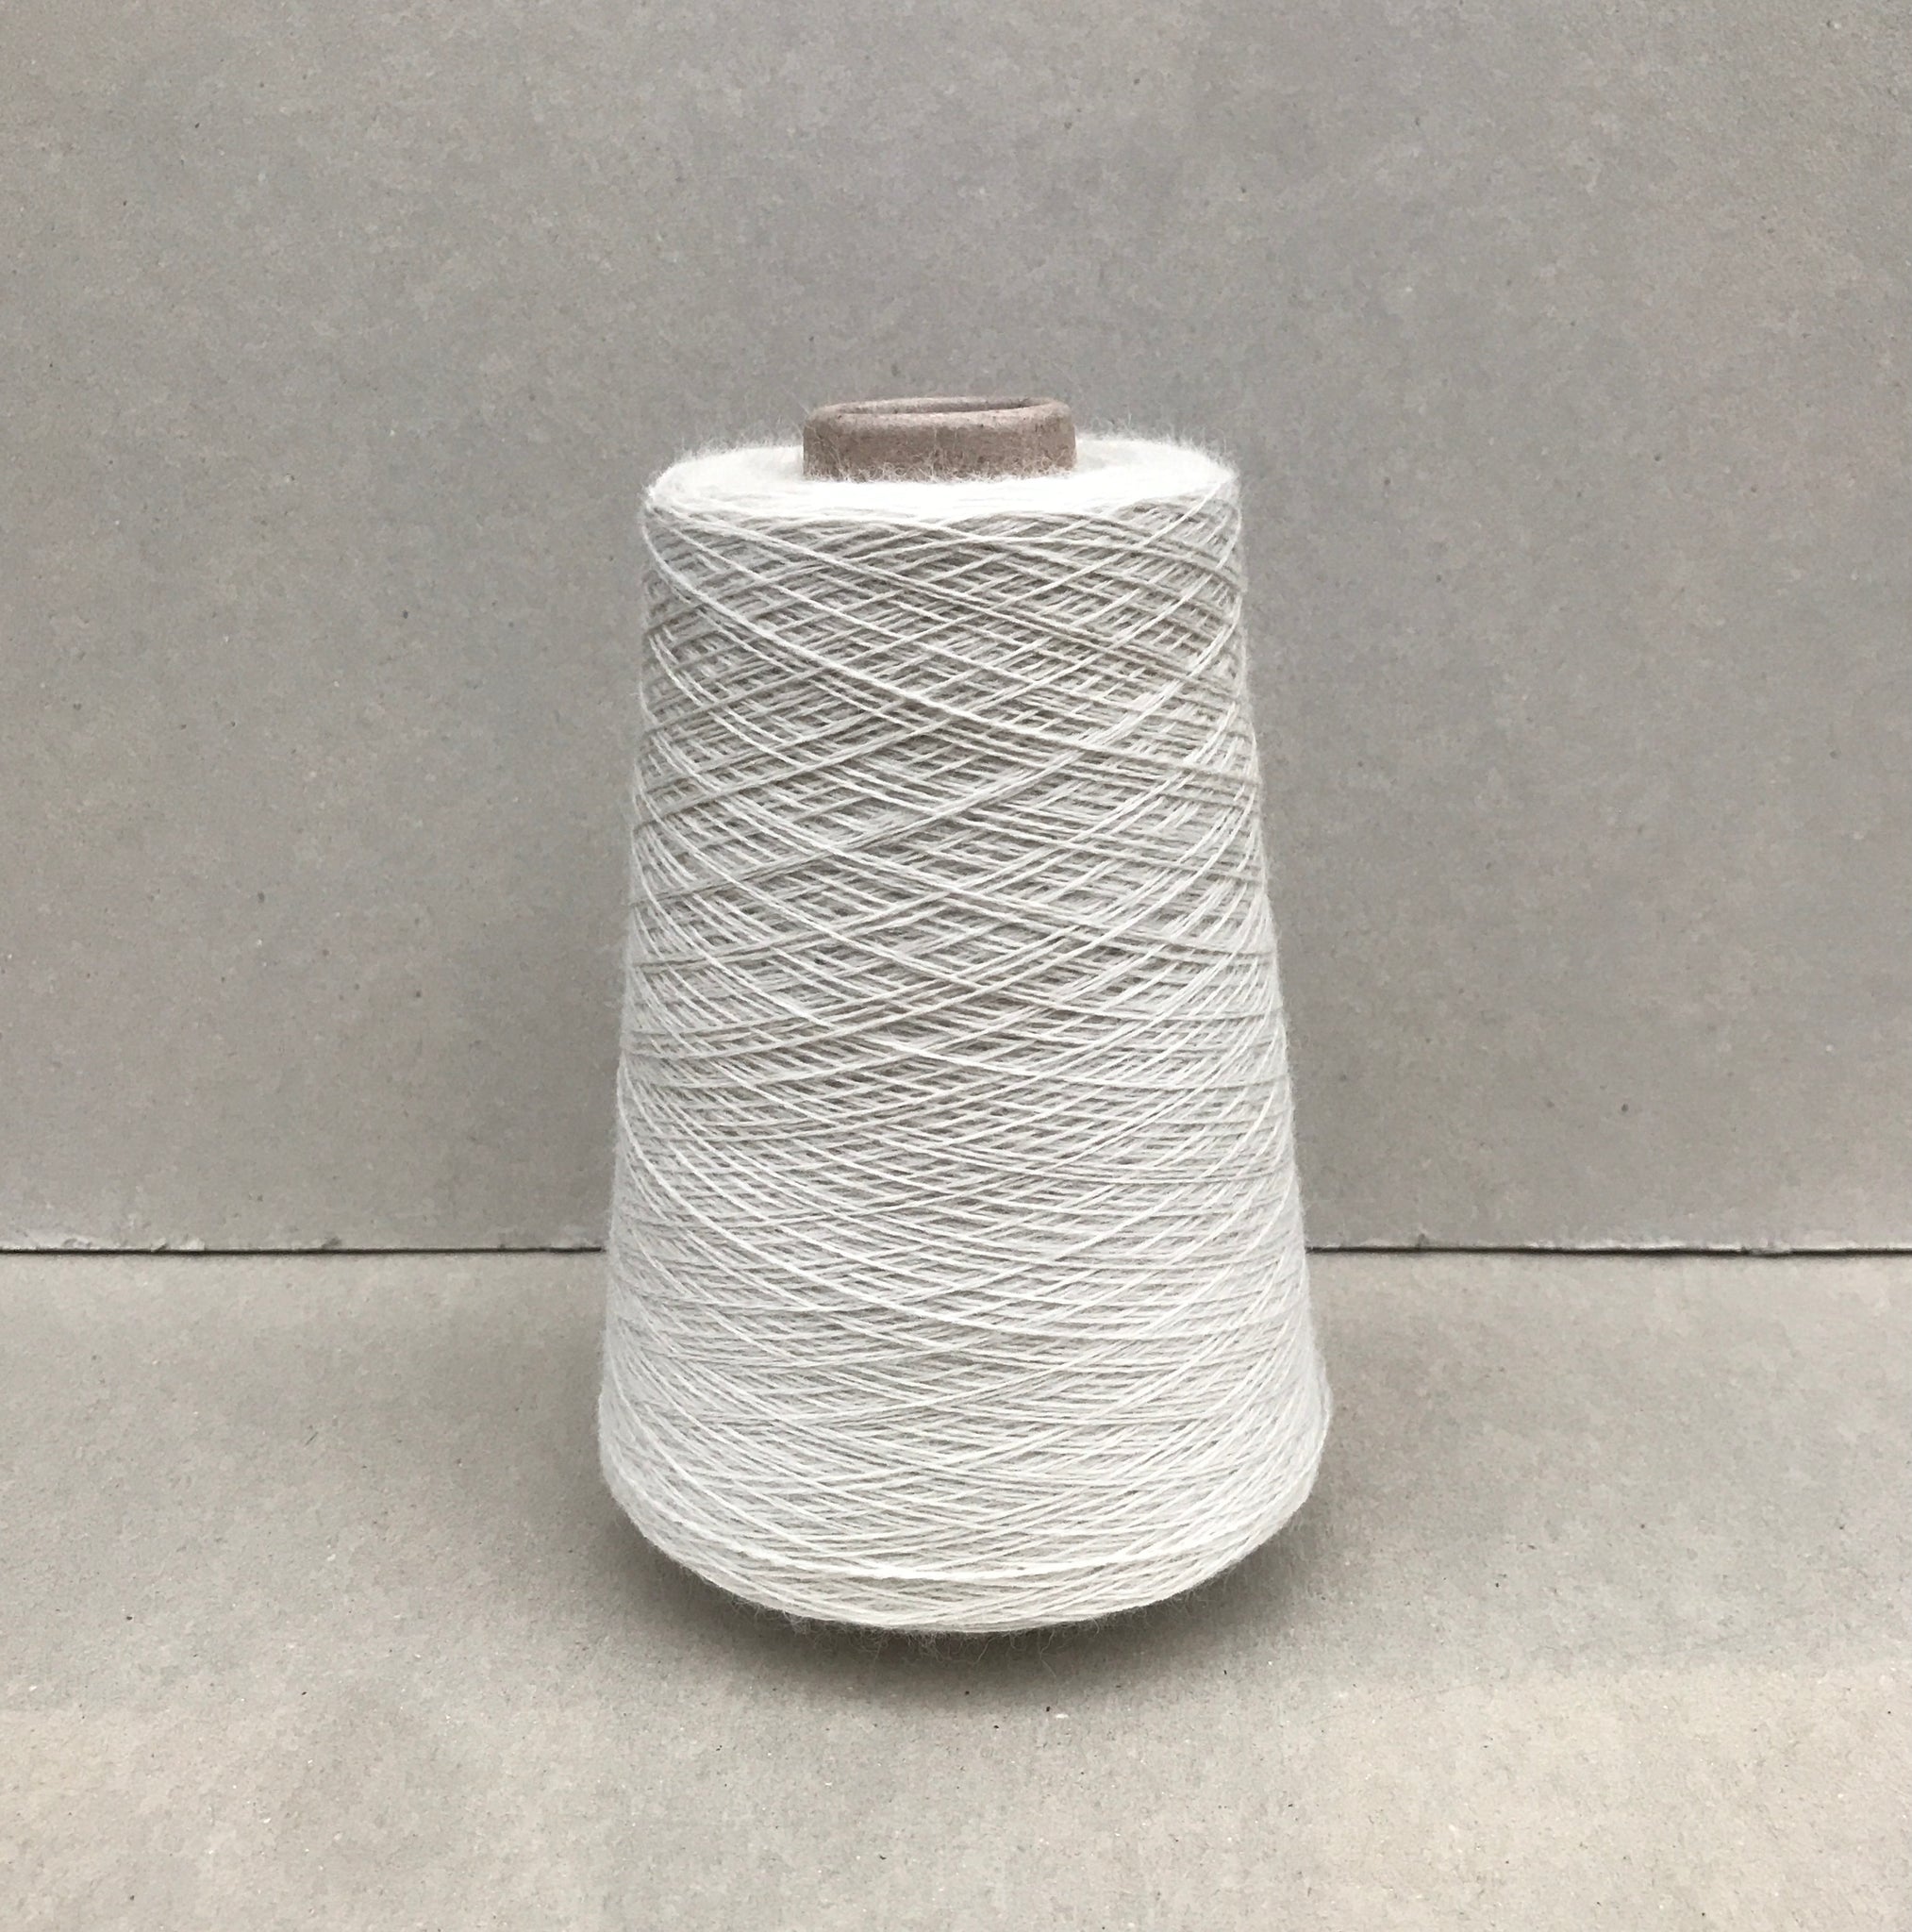 2 Ply Worsted Wool - Ecru (Undyed)